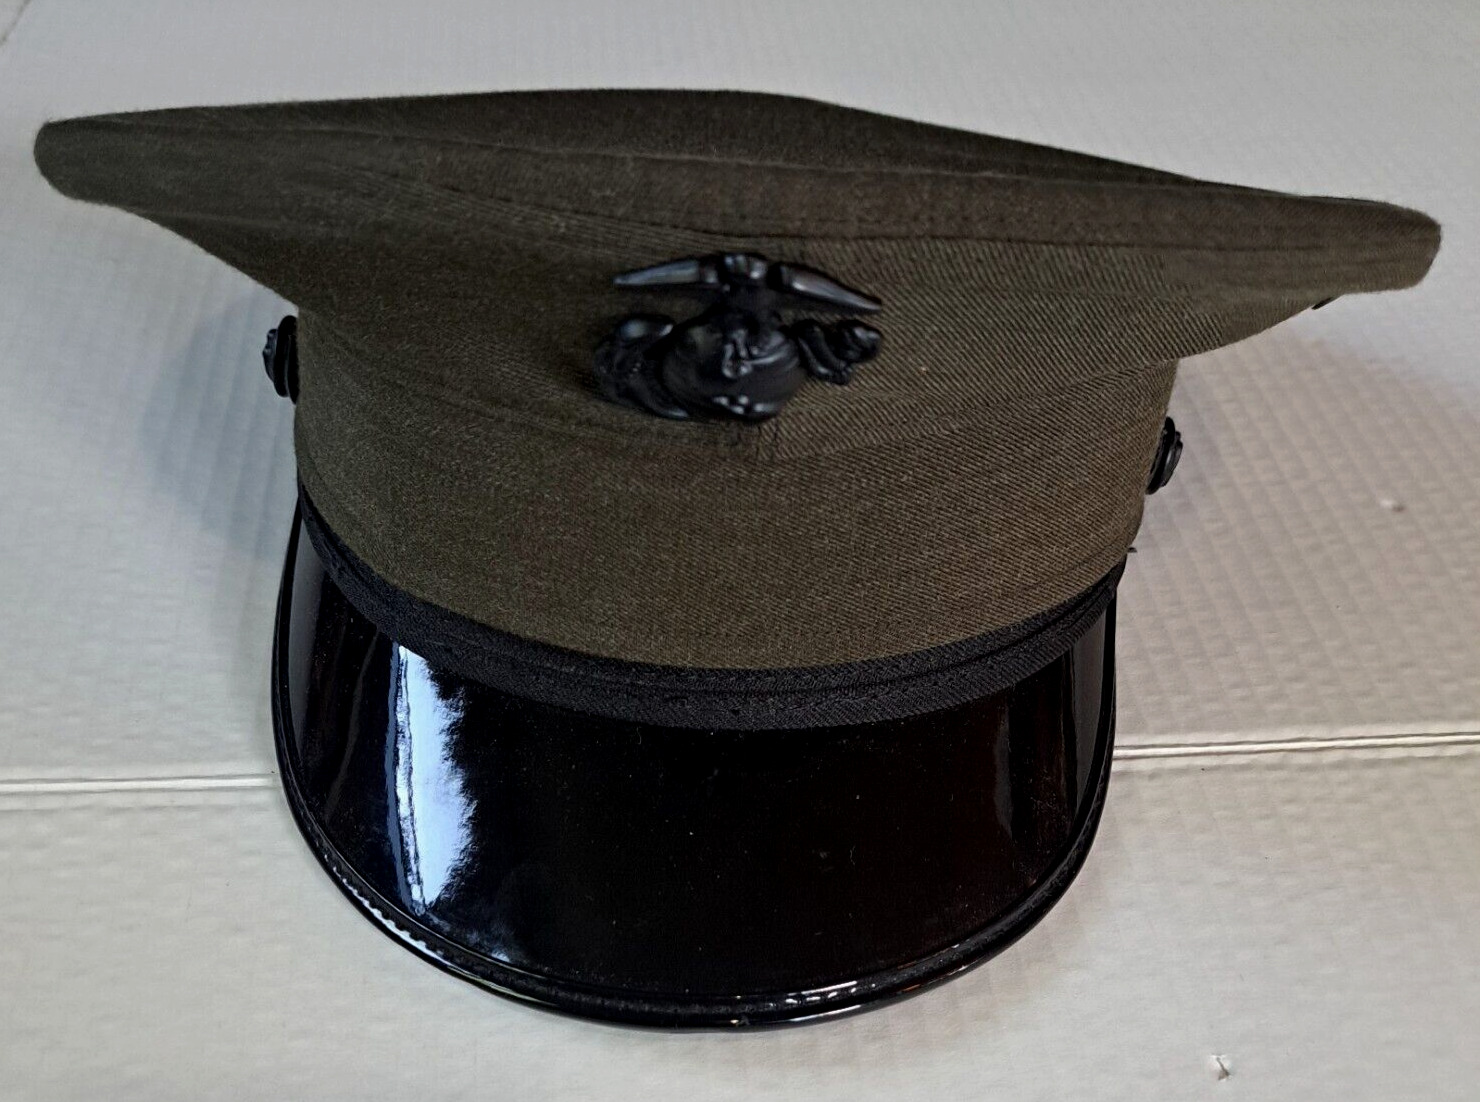 USMC Marine Corps Enlisted Service Alpha Green Cover Hat w/EGA Size 6 7/8